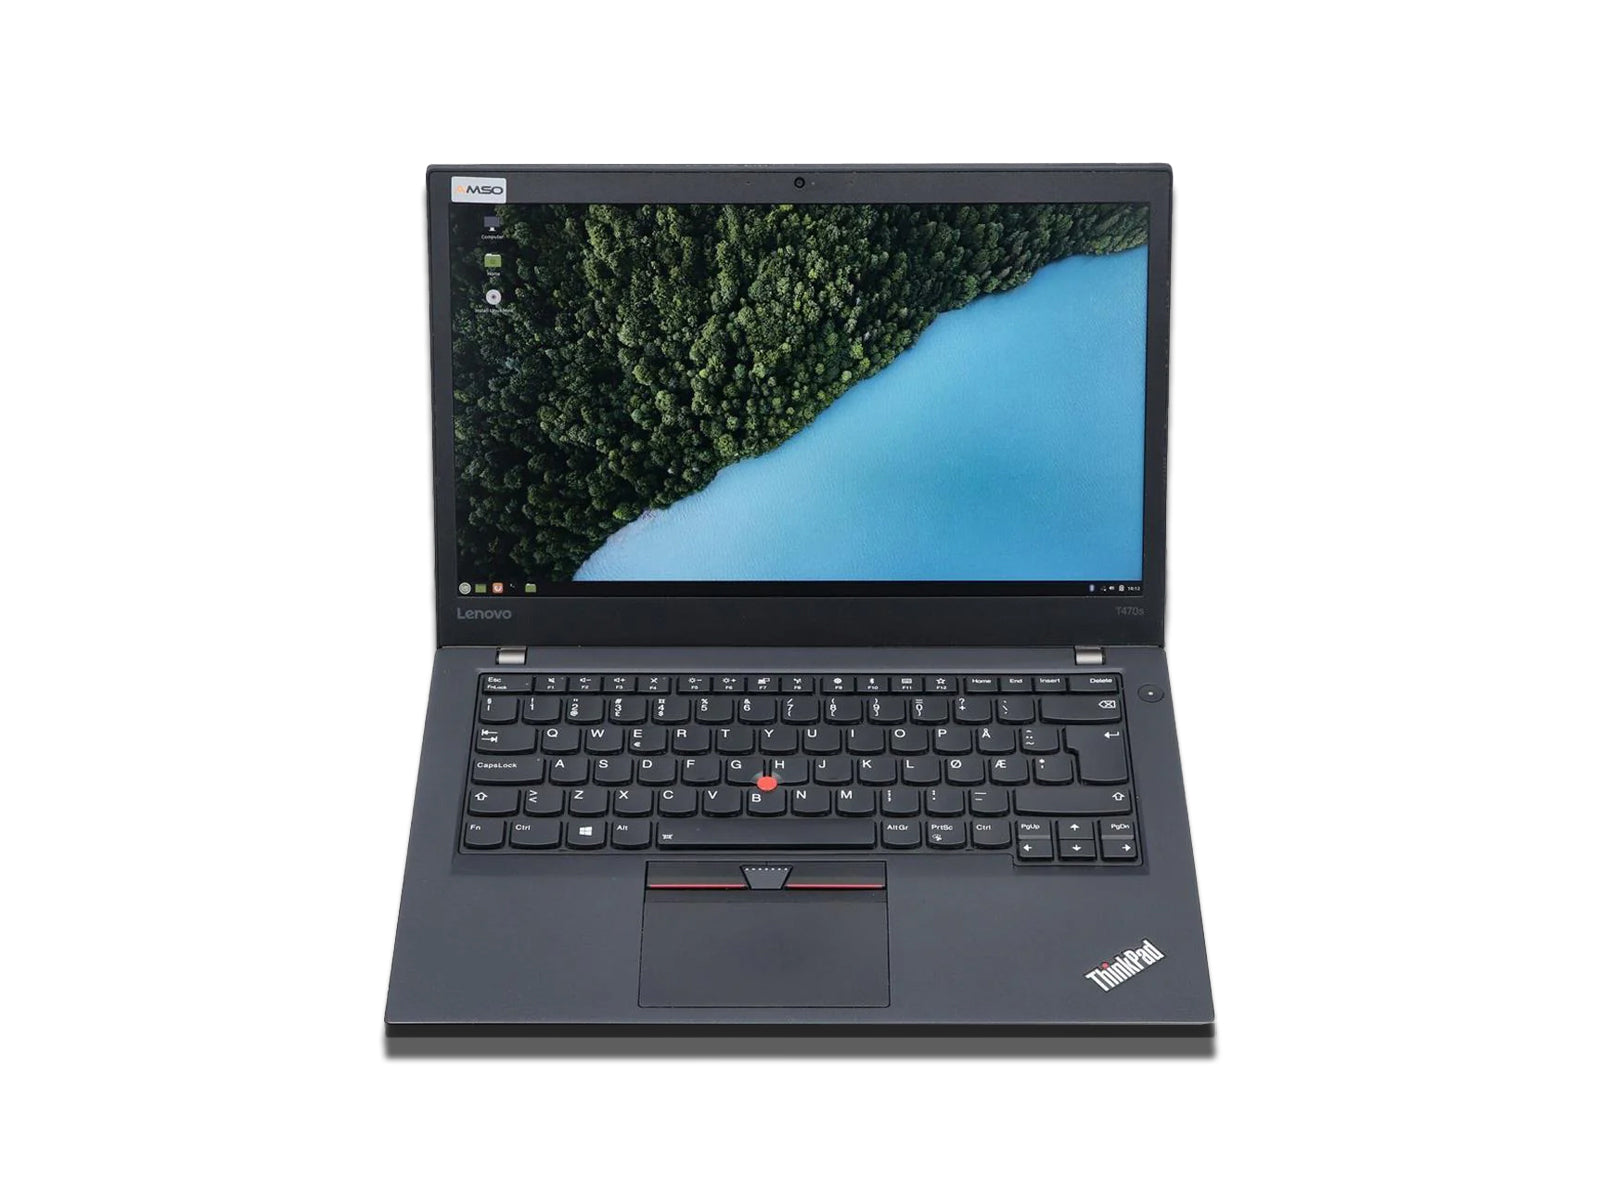 Birdseye View Image of The Lenovo T470s on The White Background